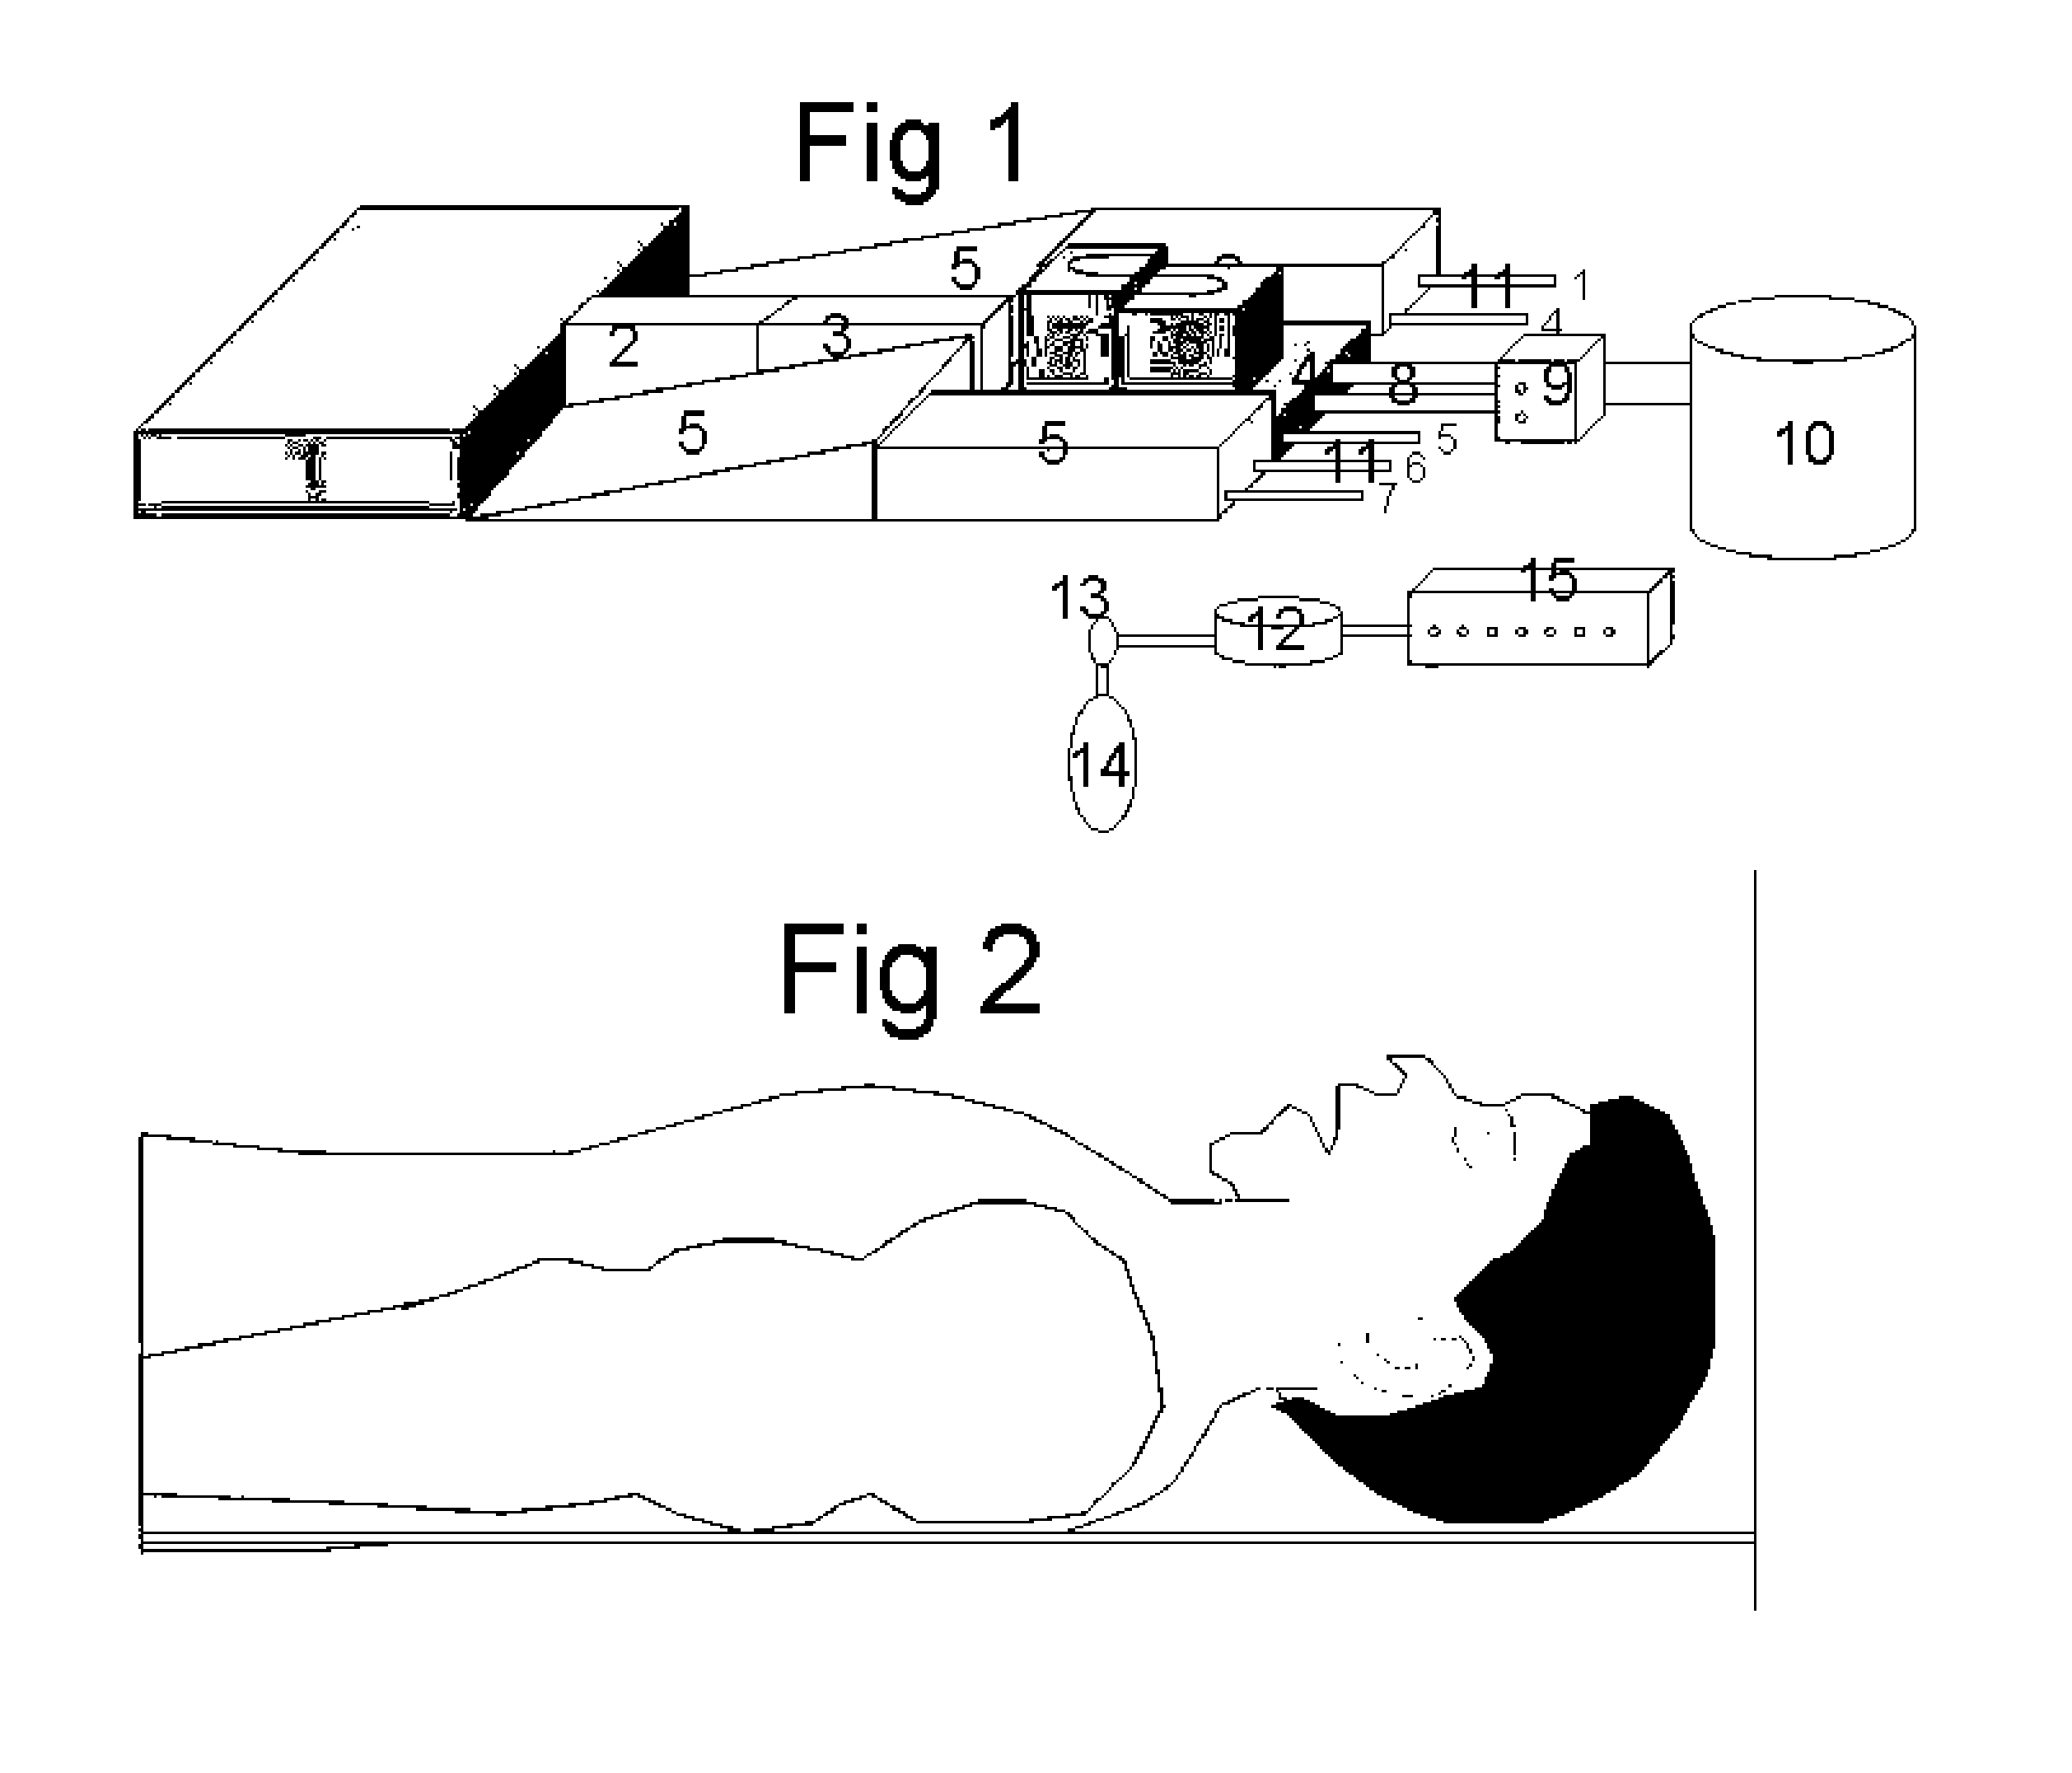 Intubation positioning, breathing facilitator and non-invasive assist ventilation device